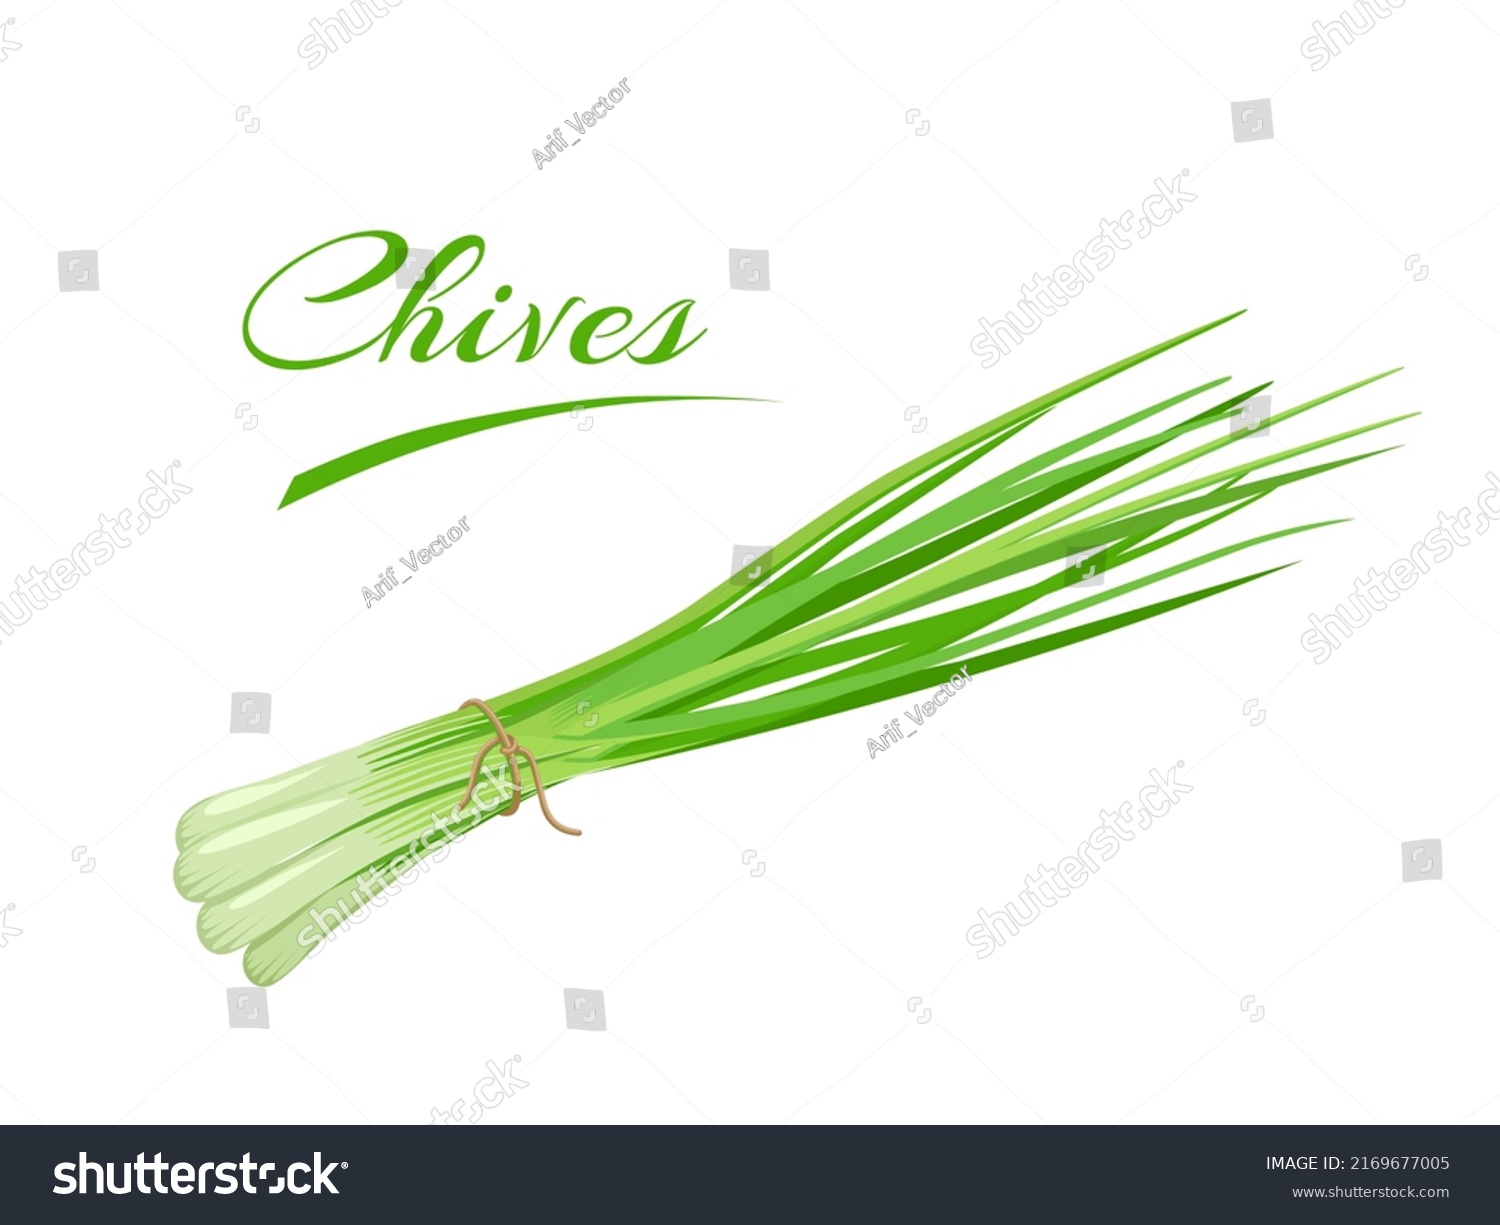 SVG of Vector illustration, bunch of fresh Chives, scientific name Allium schoenoprasum, isolated on a white background. svg